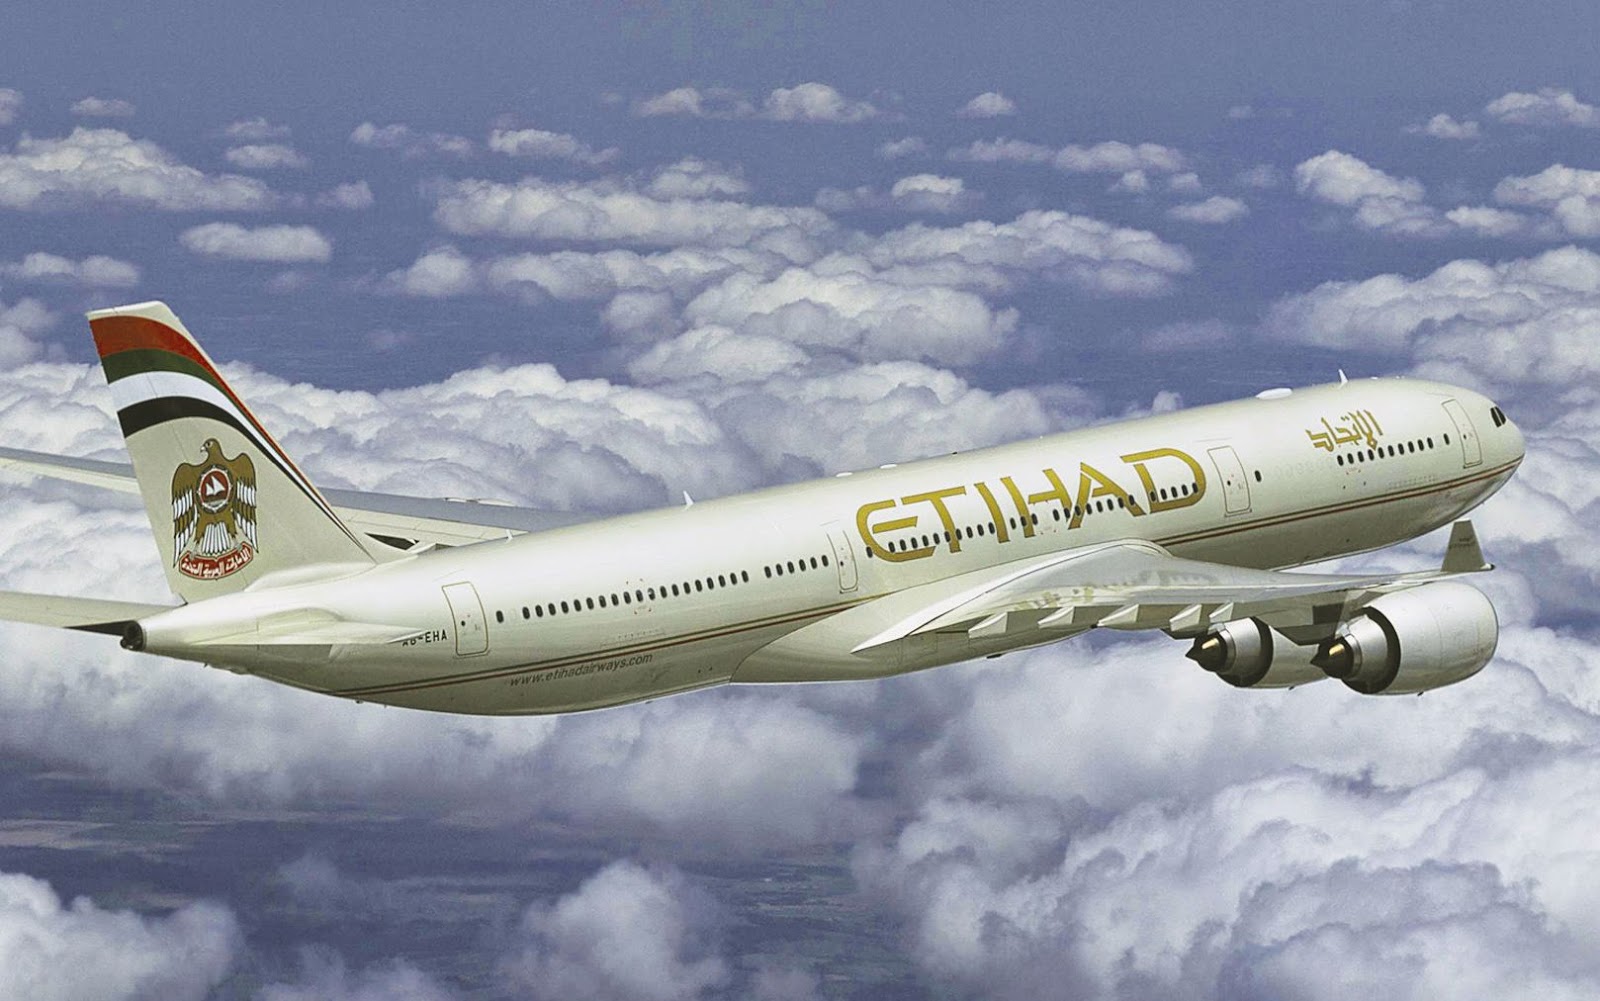 Etihad Airlines passengers to Manila on April 15 advised to call DOH